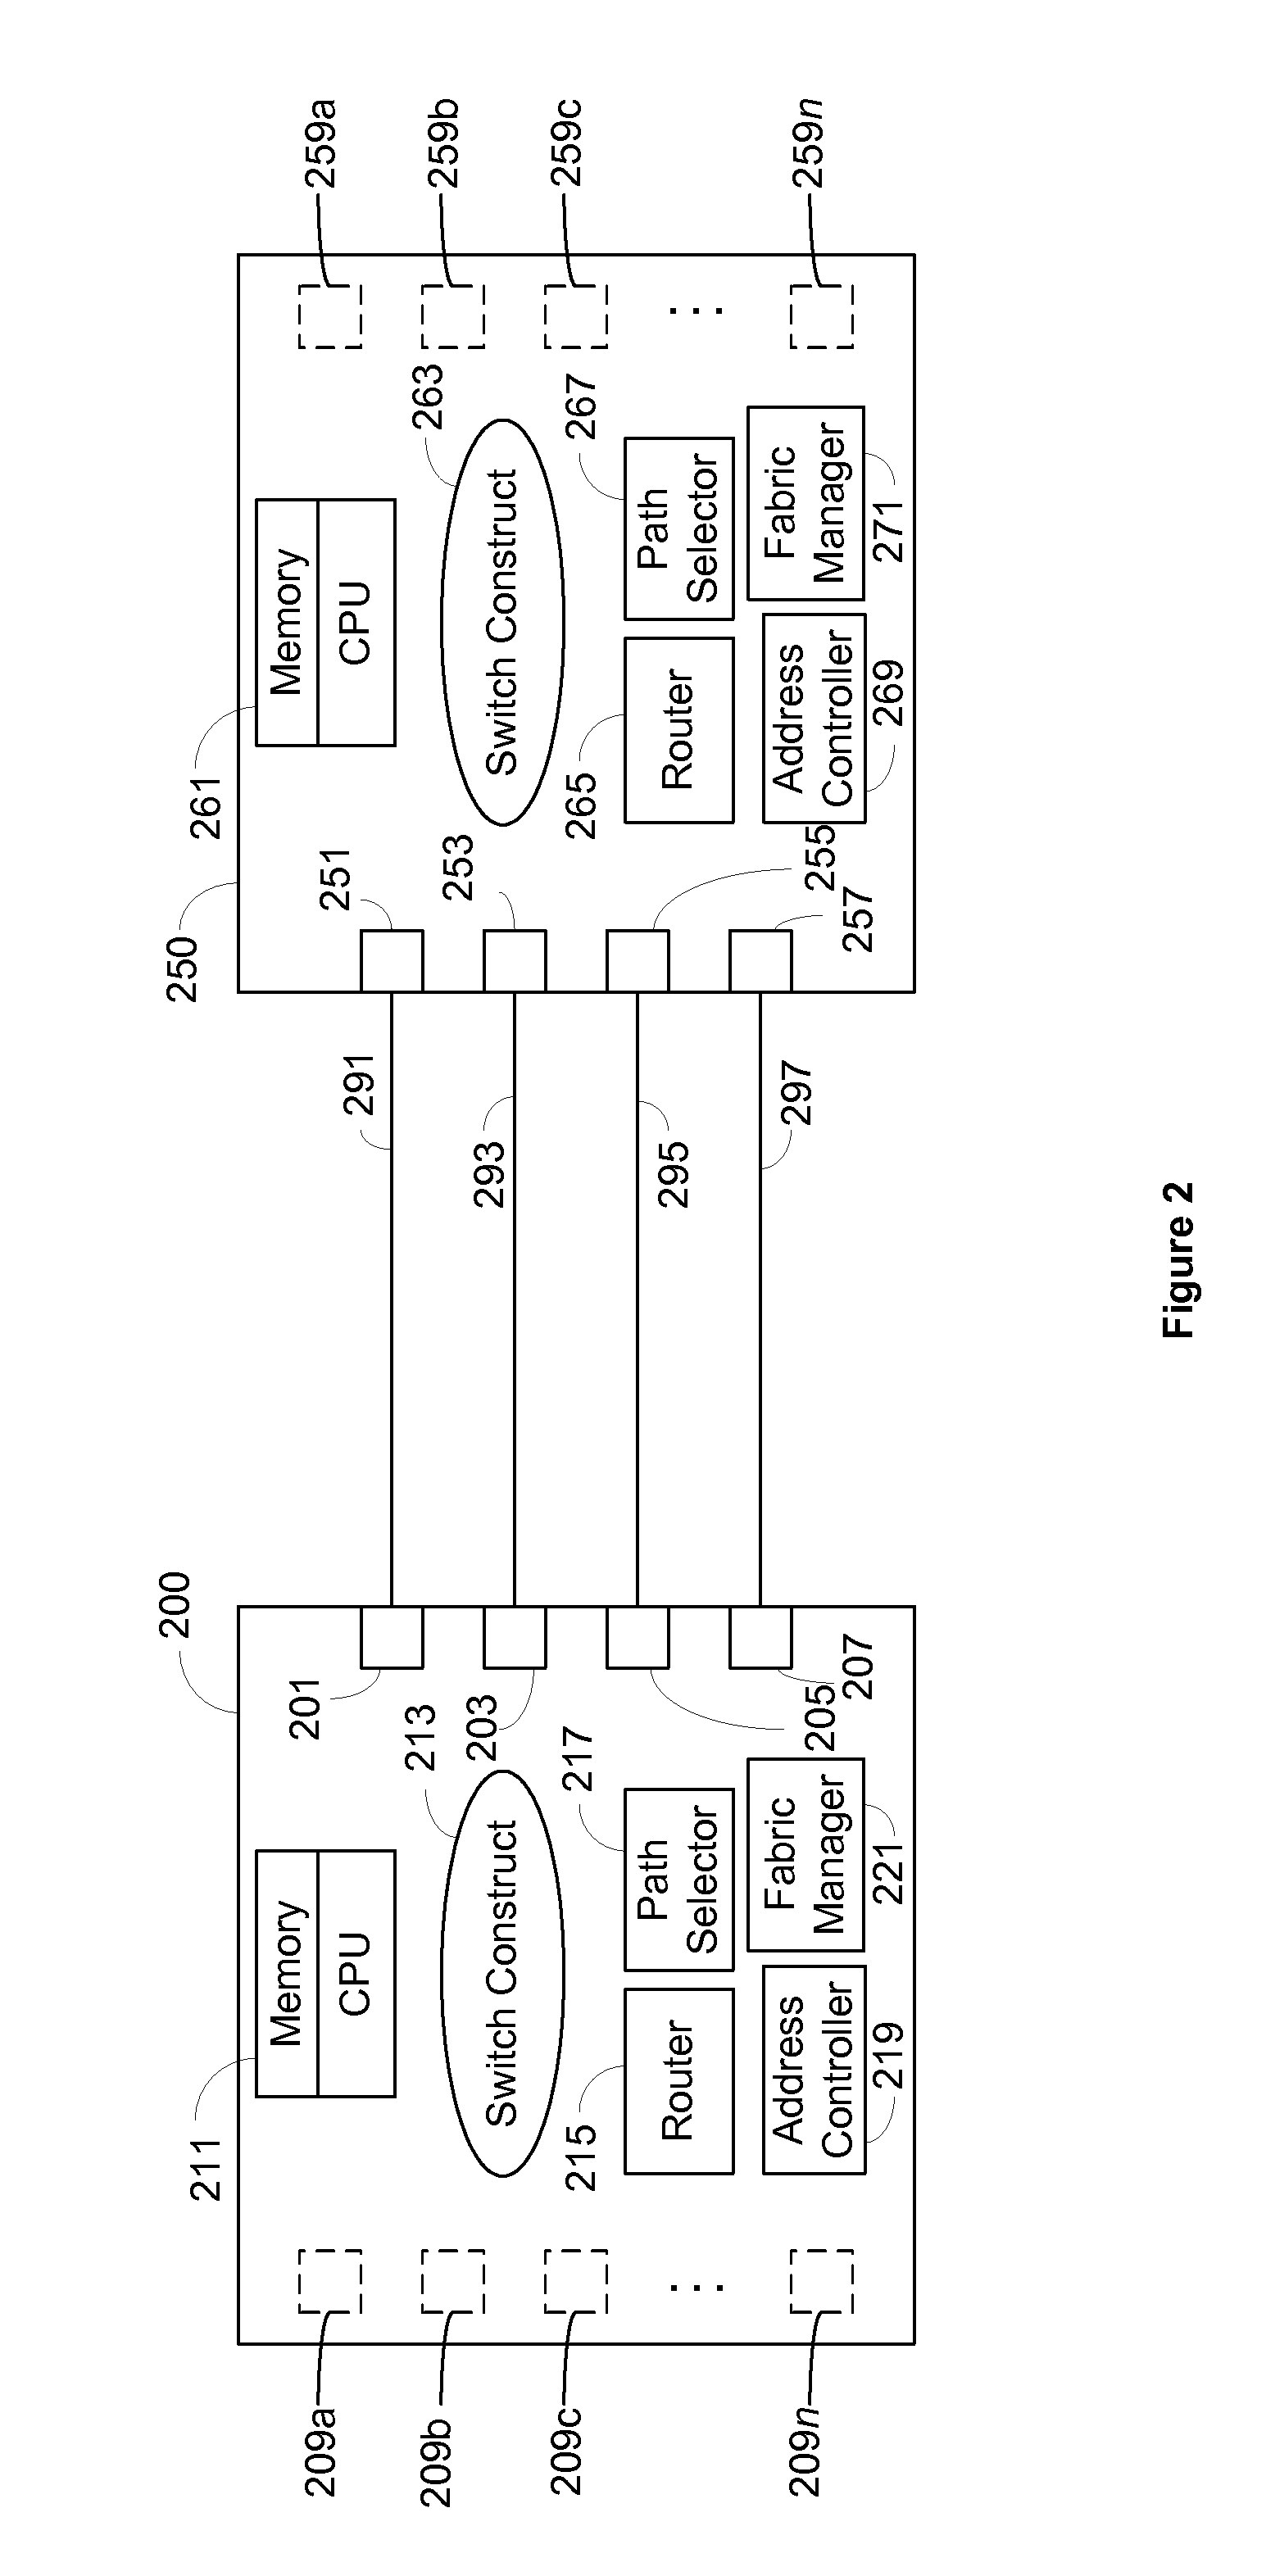 Staged Port Initiation of Inter Switch Links